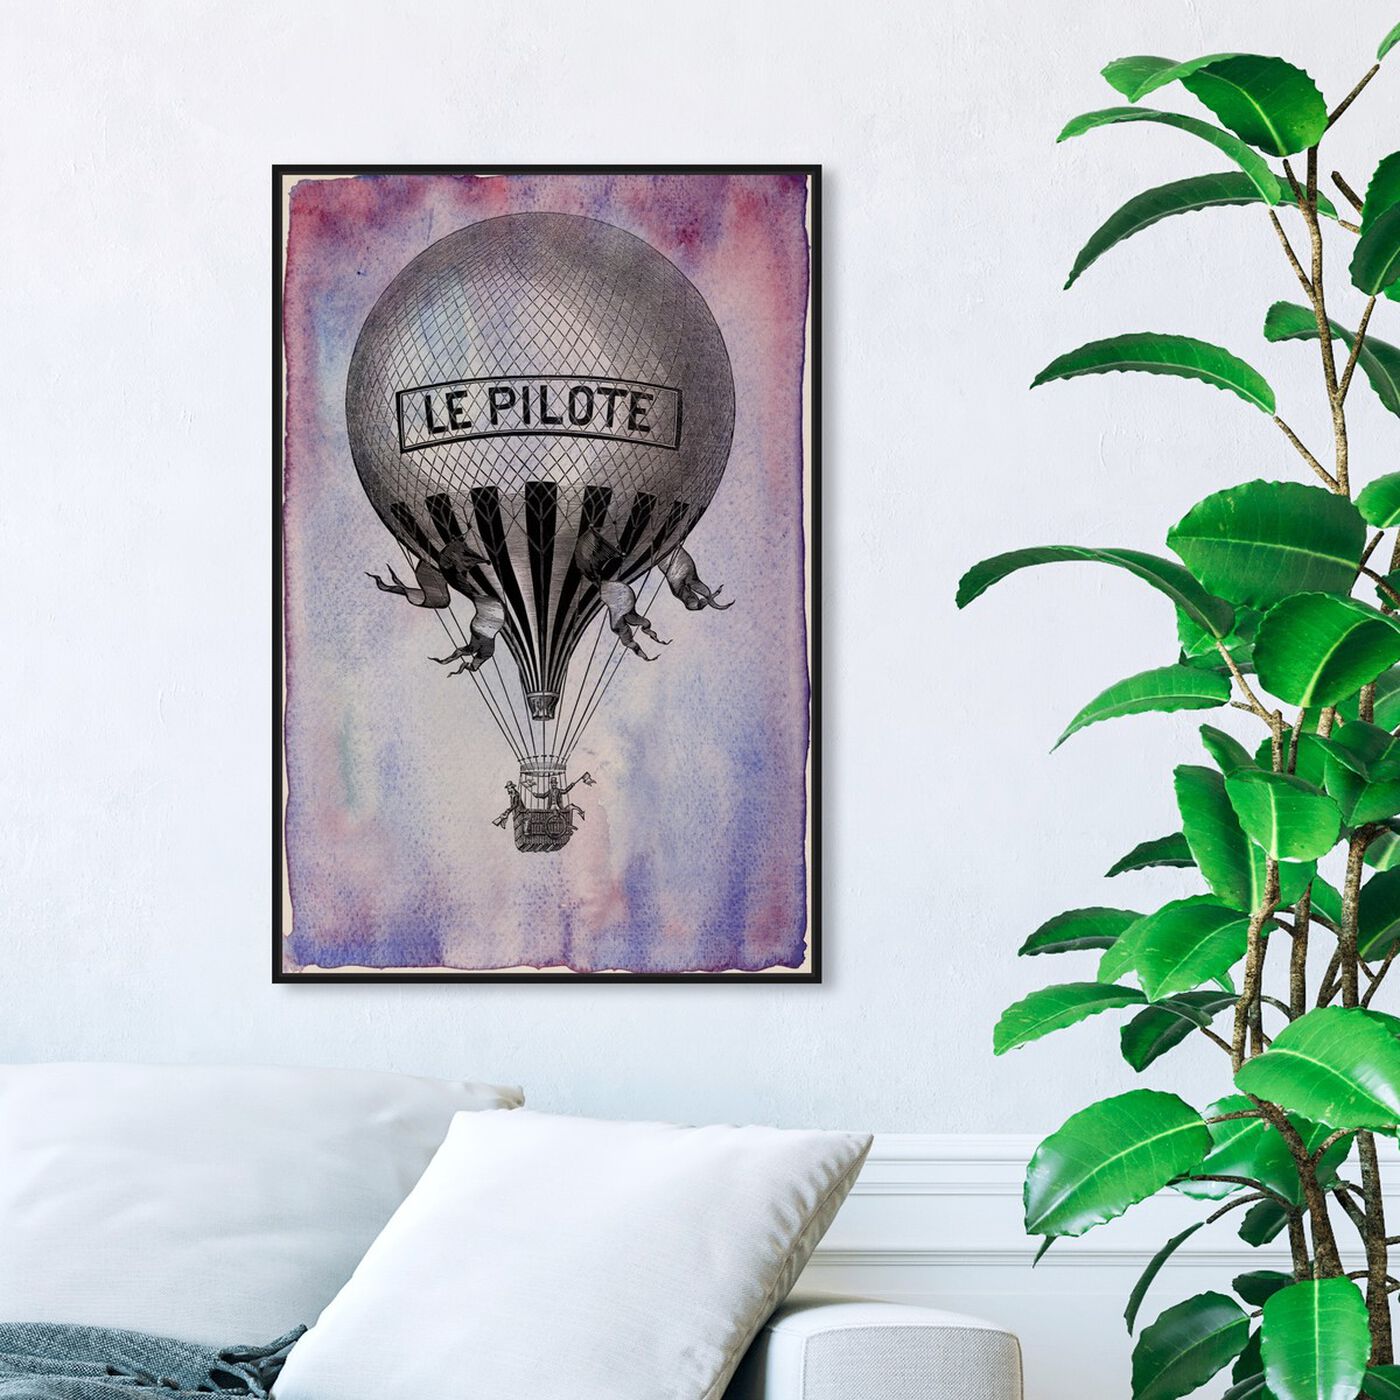 Hanging view of Le Pilote Balloon featuring transportation and air transportation art.